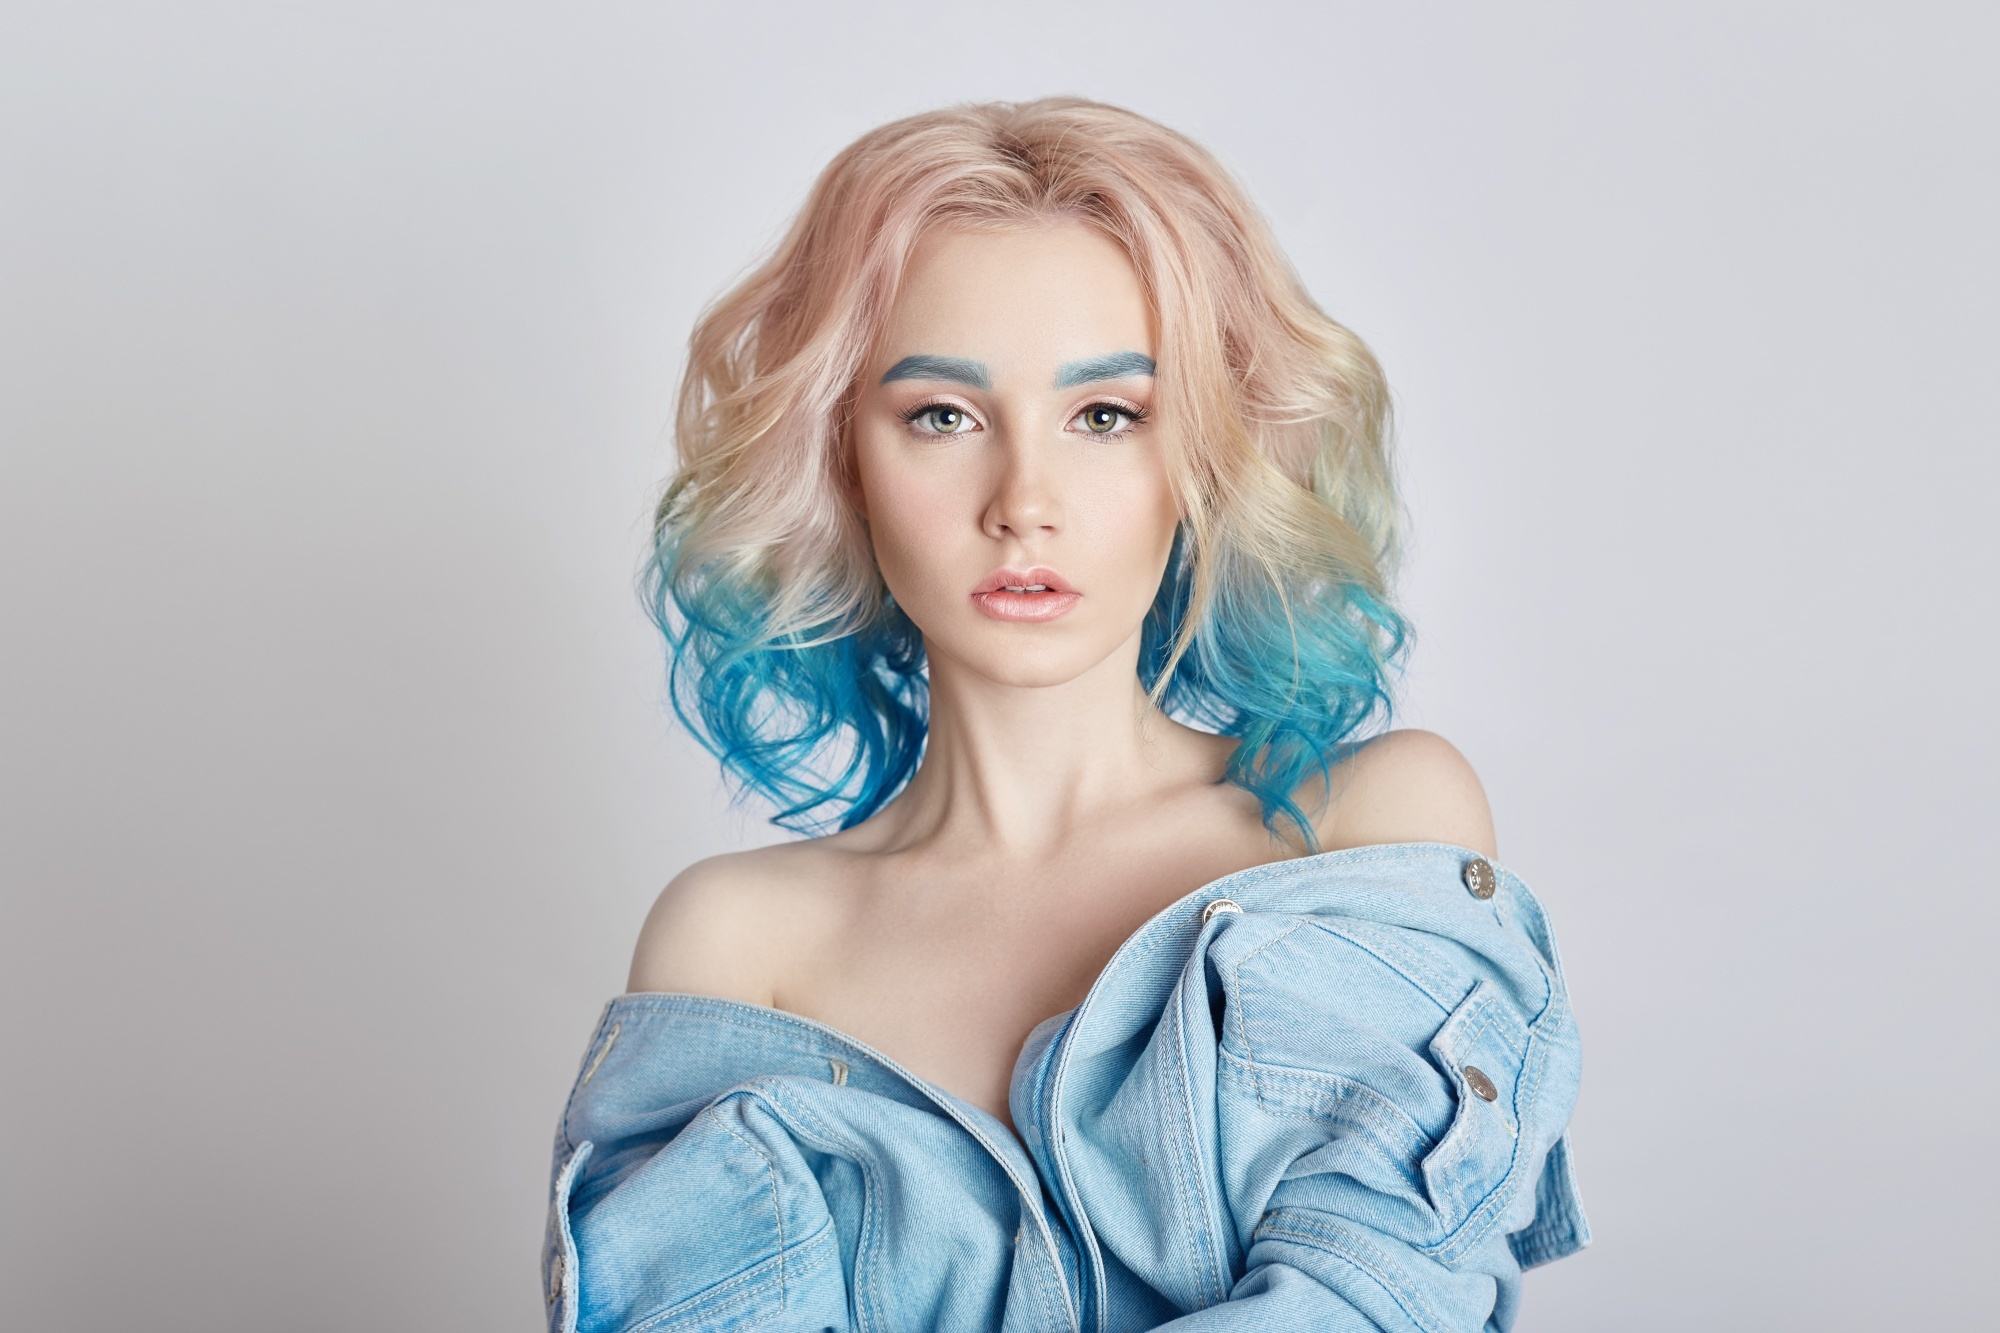 Rainbow Hair Color Ideas: 12 Ways to Wear Them With Pride | All Things ...